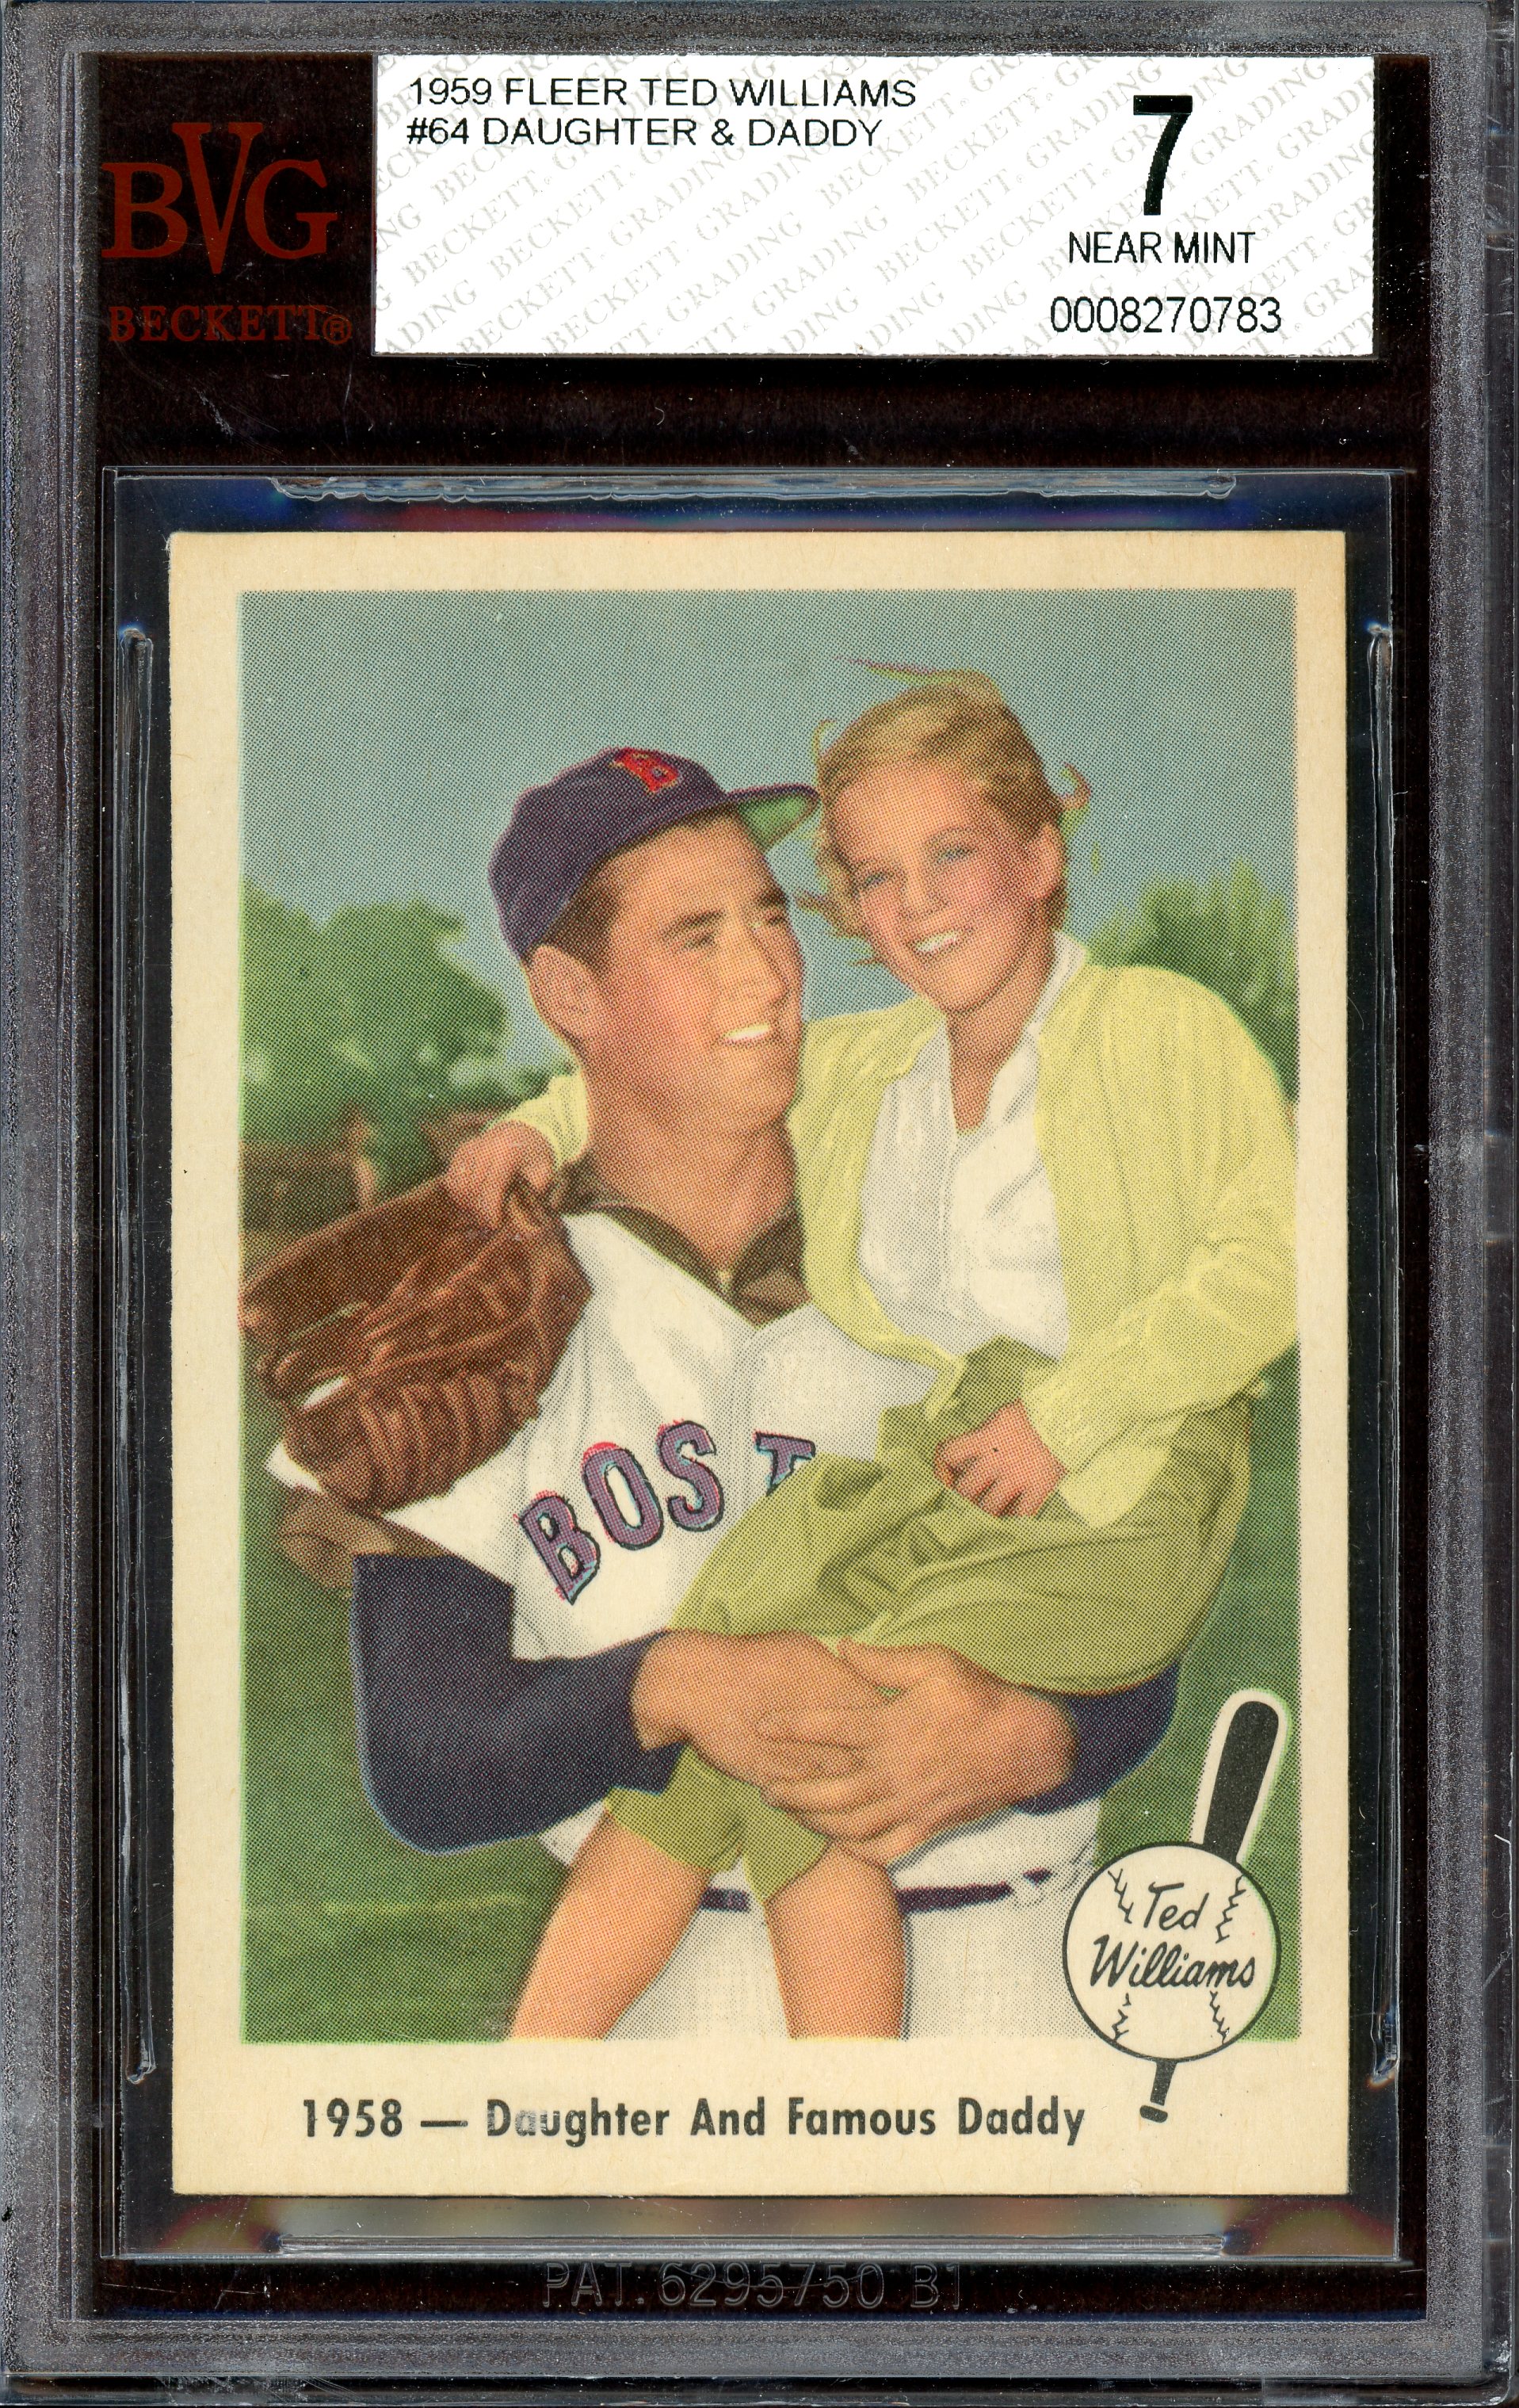 1959 Fleer Ted Williams #64 Daughter and Daddy